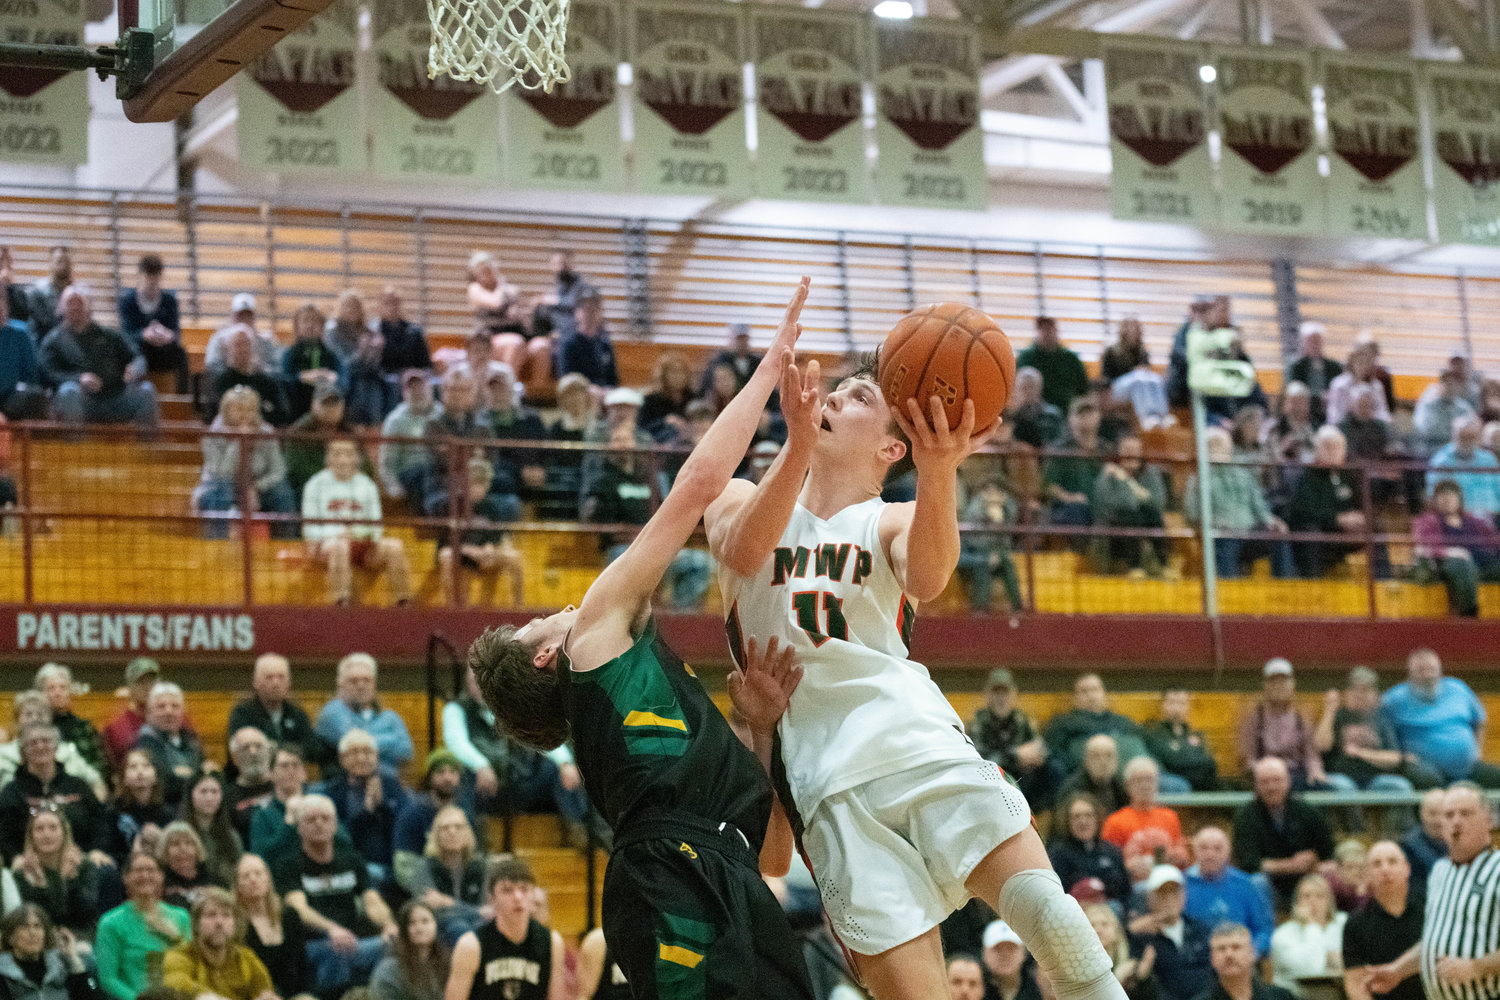 Hunter Hazen goes up to the basket through contact during MWP's win over Northwest Christian in the 2B state tournament's opening round, at Chehalis on Feb. 25.